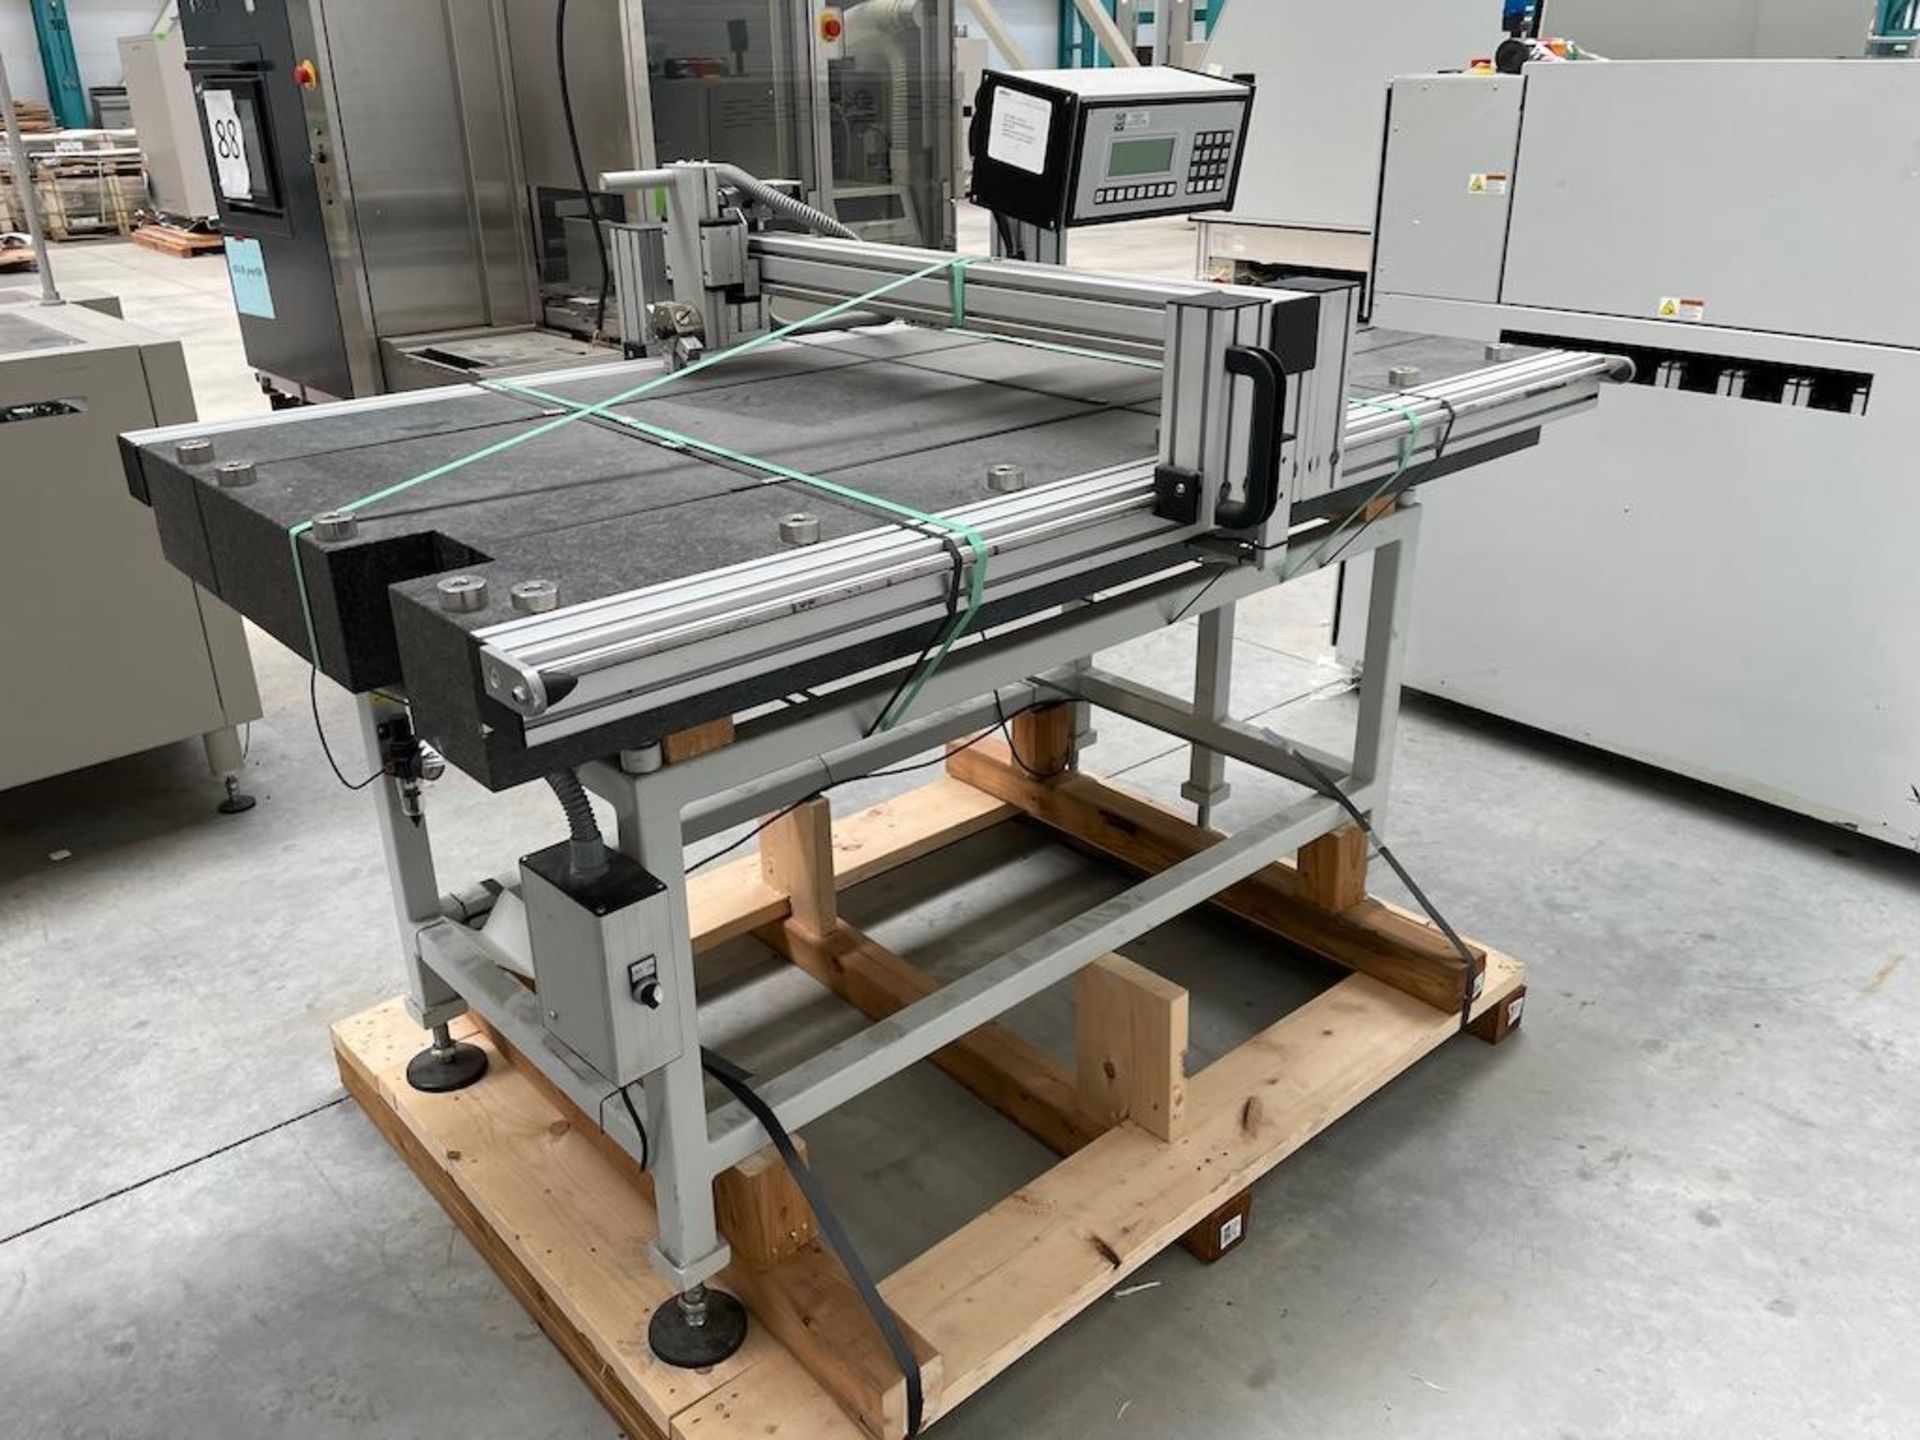 OELZE HECHT MEASURING TABLE 1800 X 900 X 150 MM, DIGITAL CONTROLS [MATANE] *PLEASE NOTE, EXCLUSIVE R